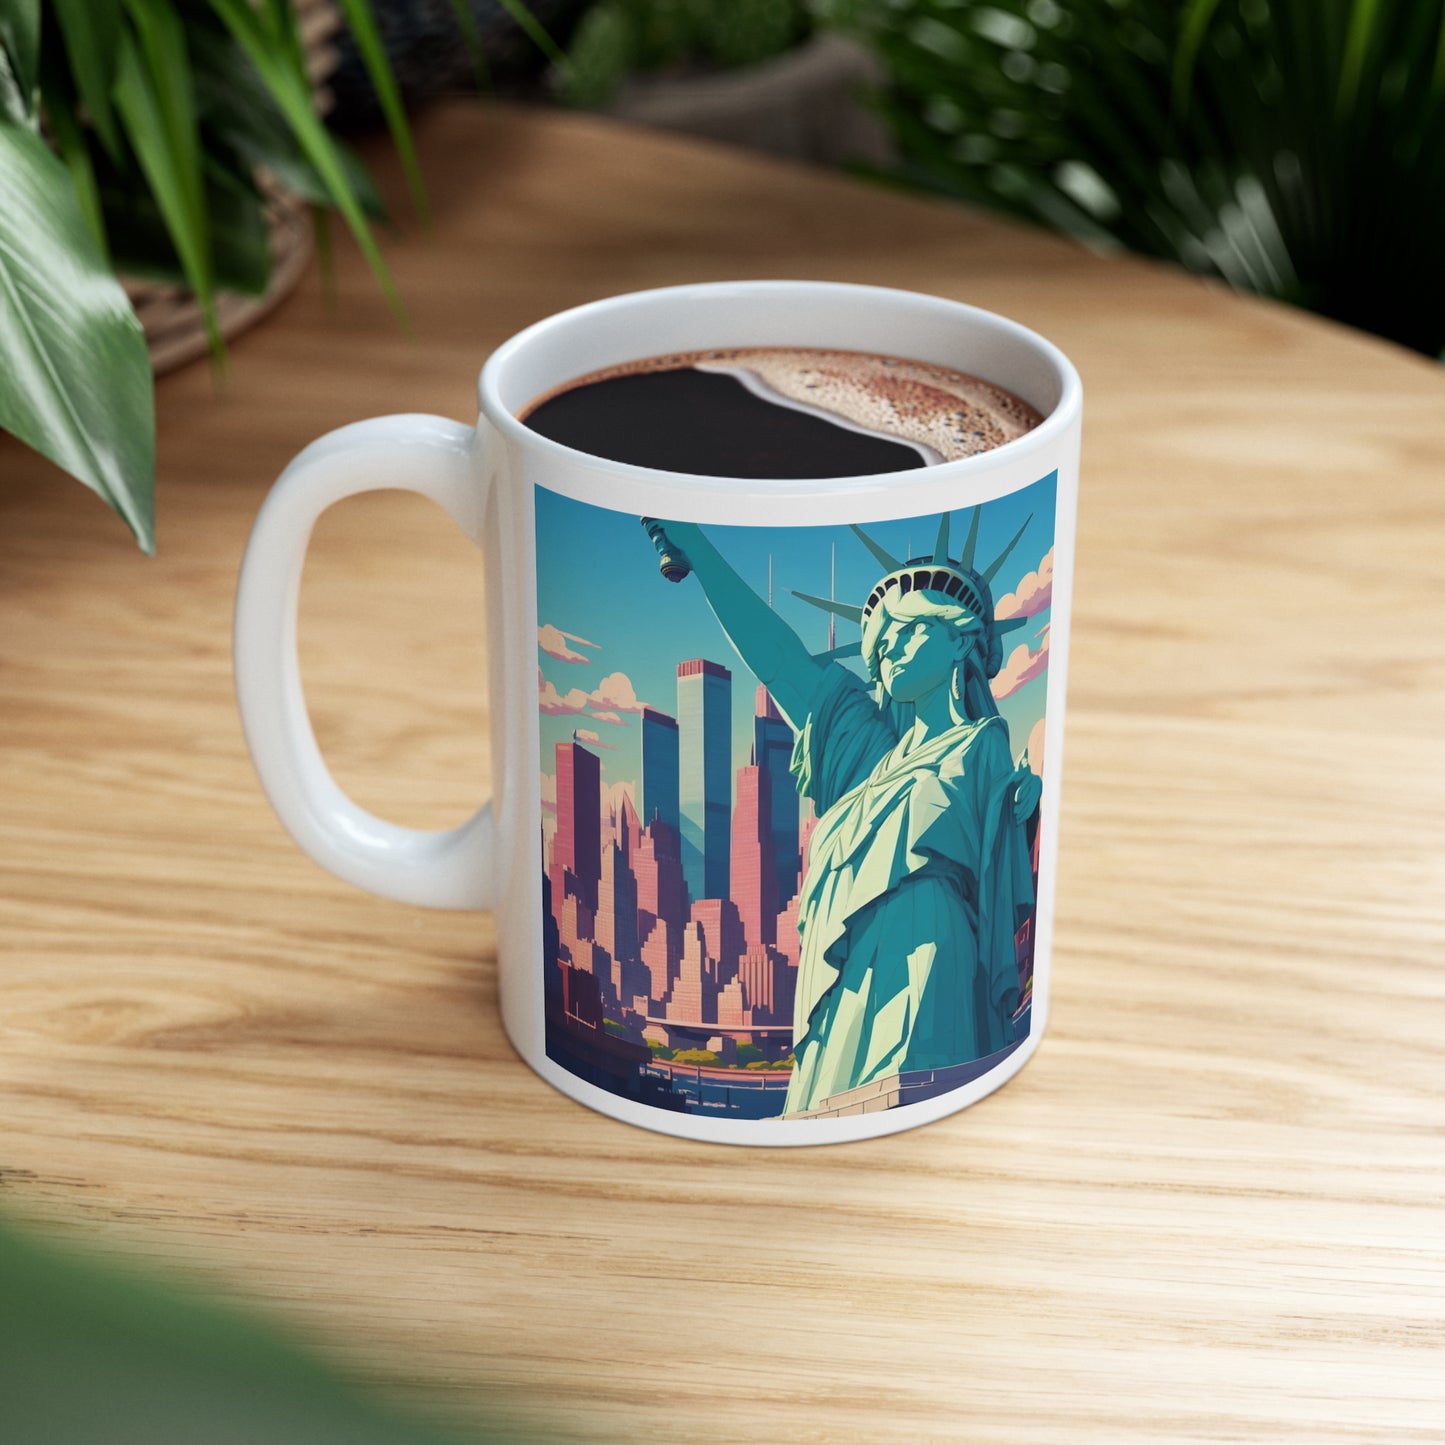 Statue of Liberty | Lady Liberty | Patriotic Gift | NYC | New York City | Independence Day | July 4th | America | Freedom | Mug 11oz